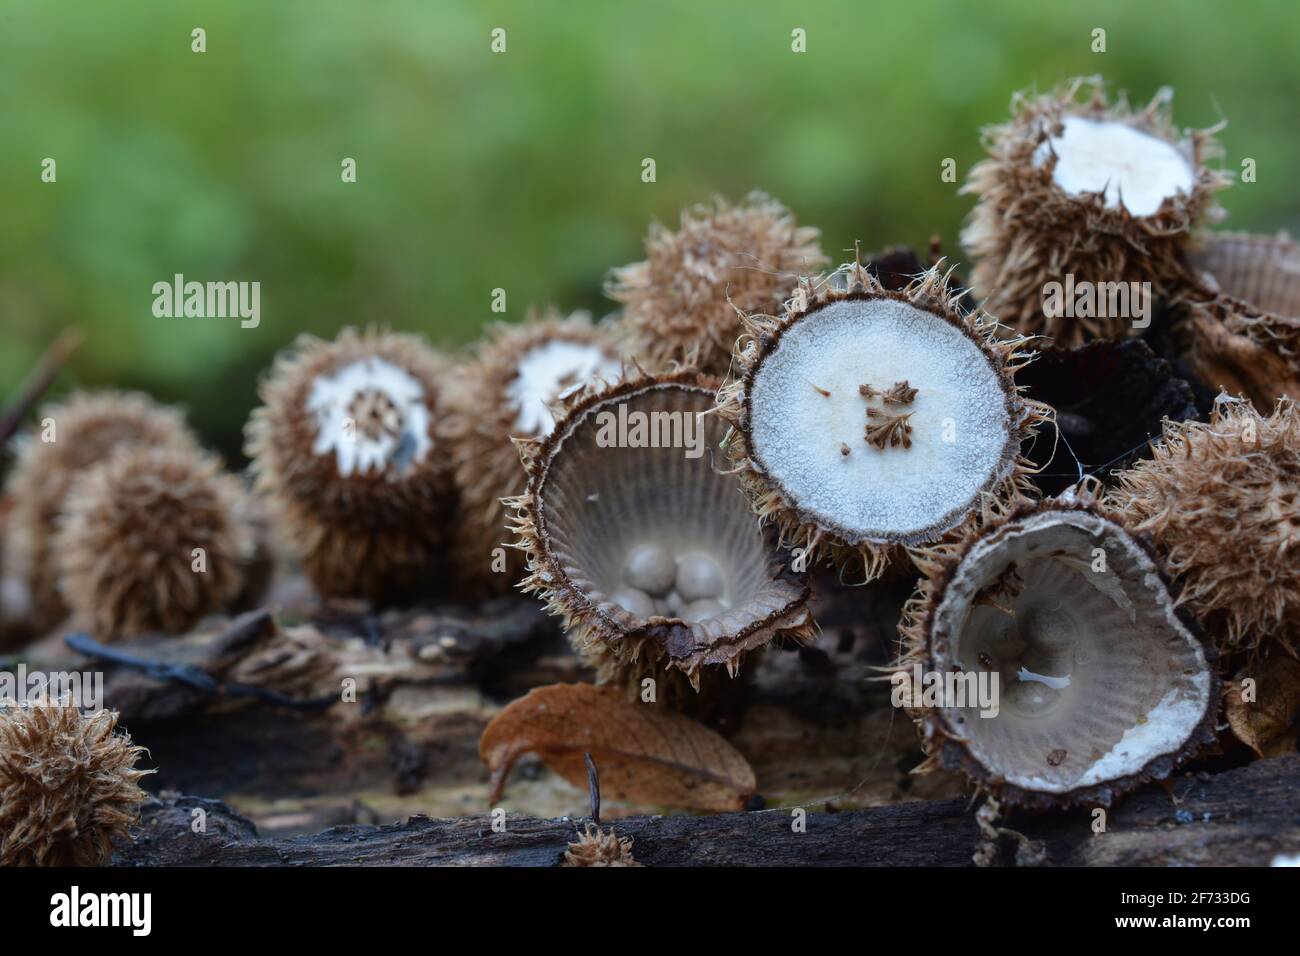 Bird's nest fungus or Cyathus striatus, an unusual looking mushroom in different stages of development in natural habitat on rotting wood besides moun Stock Photo